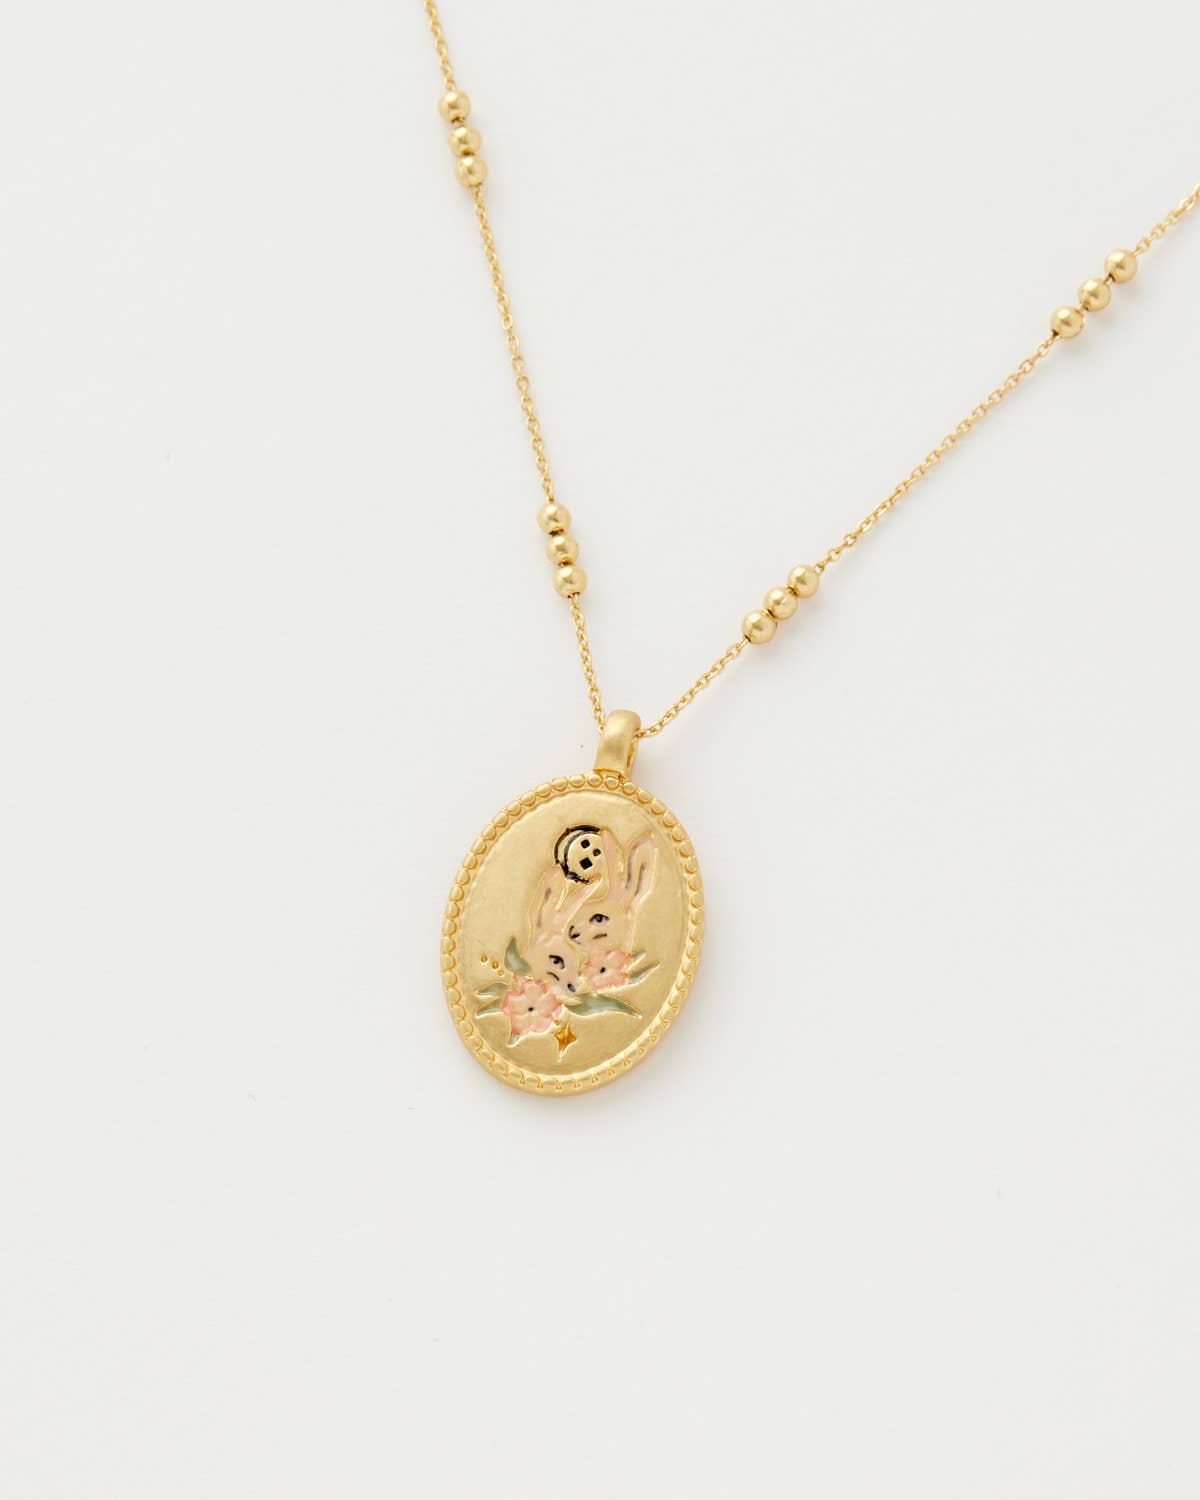 Zodiac Necklace - Gemini - Out of the Blue